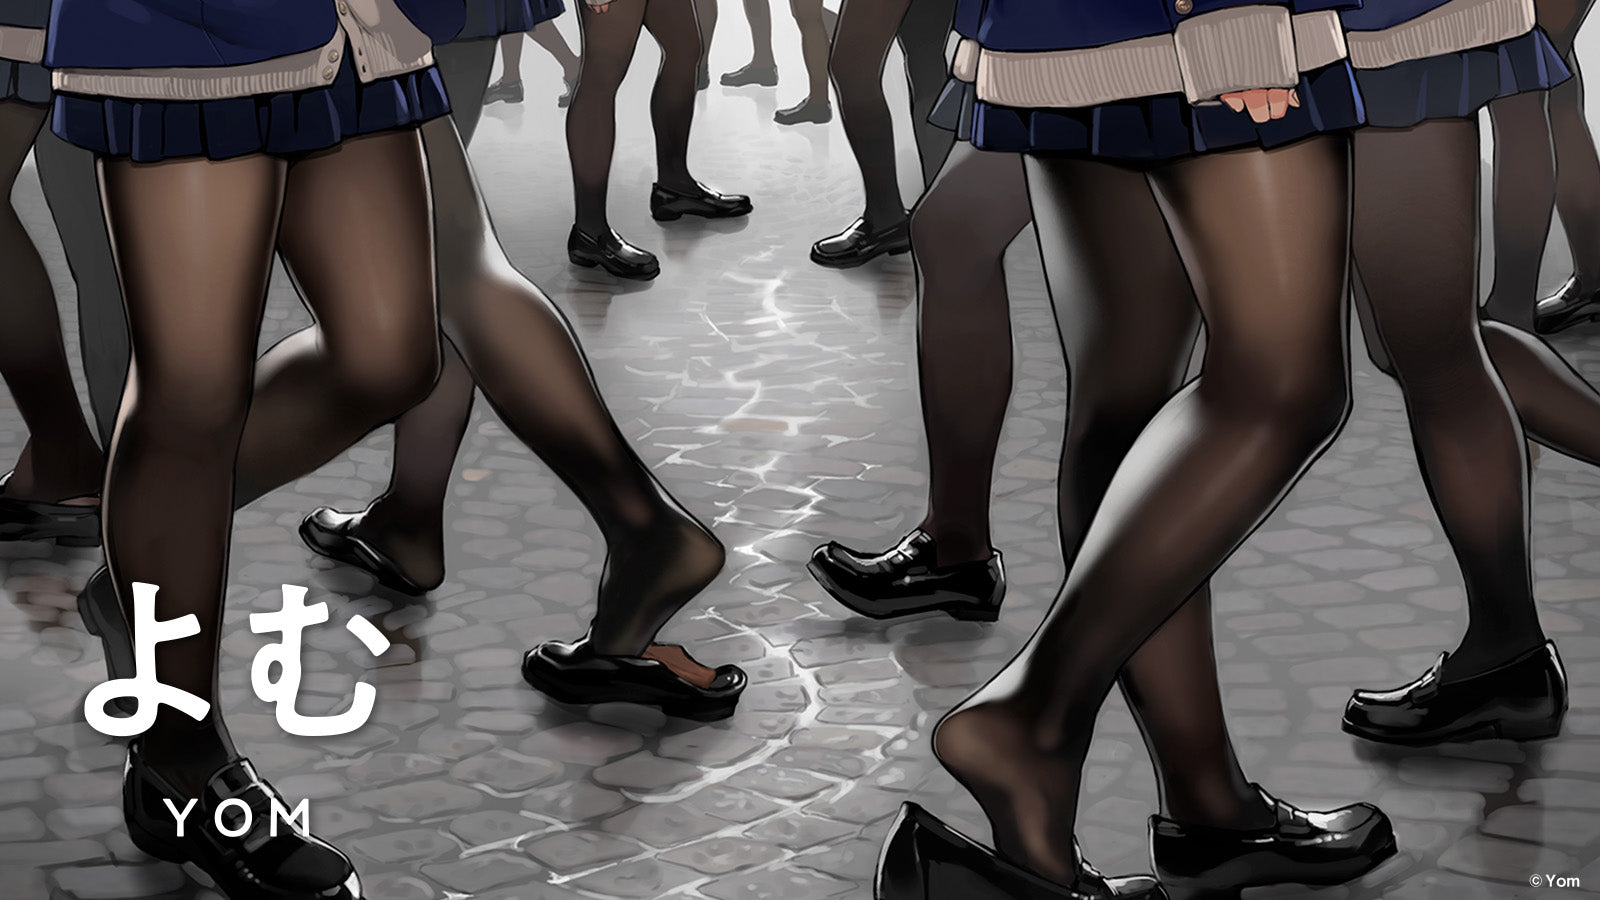 The Girls from Miru Tights Get Featured as a Poster!